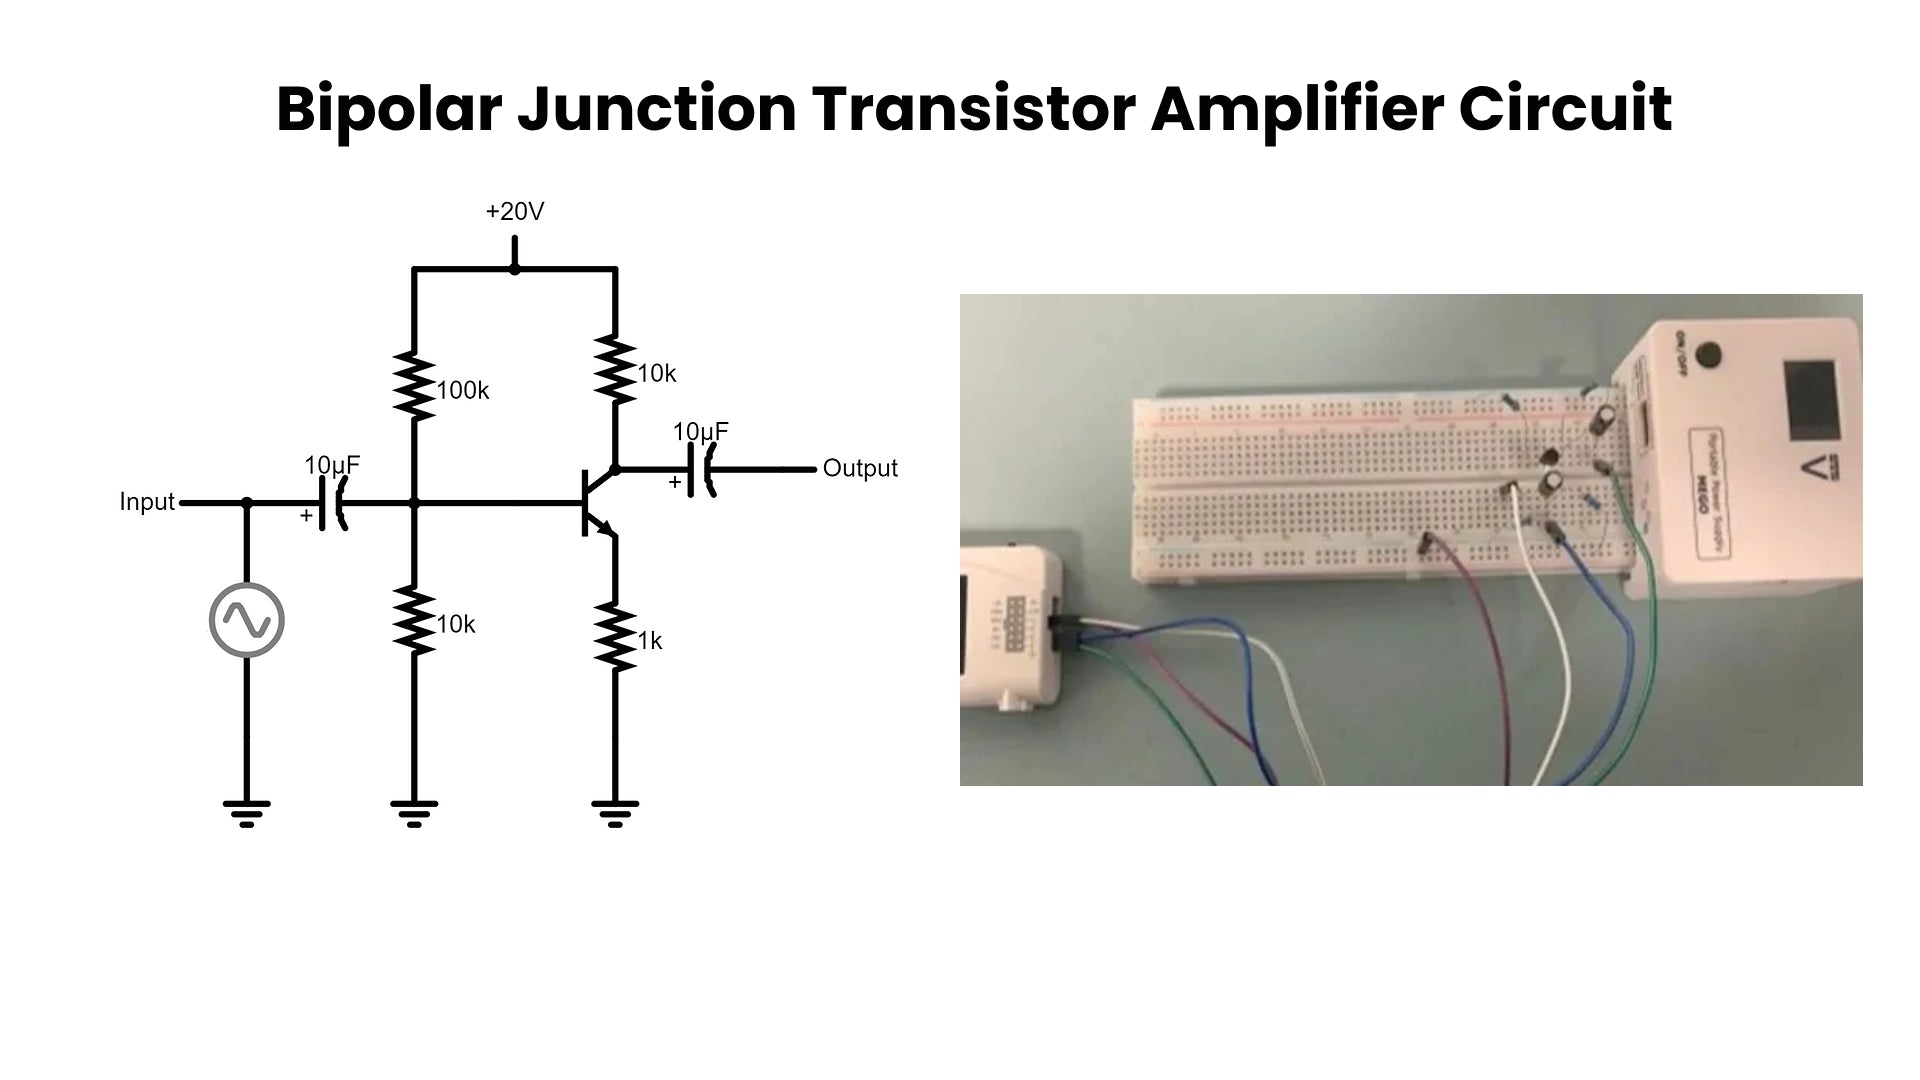 Bipolar Junction Transistor Amplifier Circuit - Building circuit & observing the amplified output.